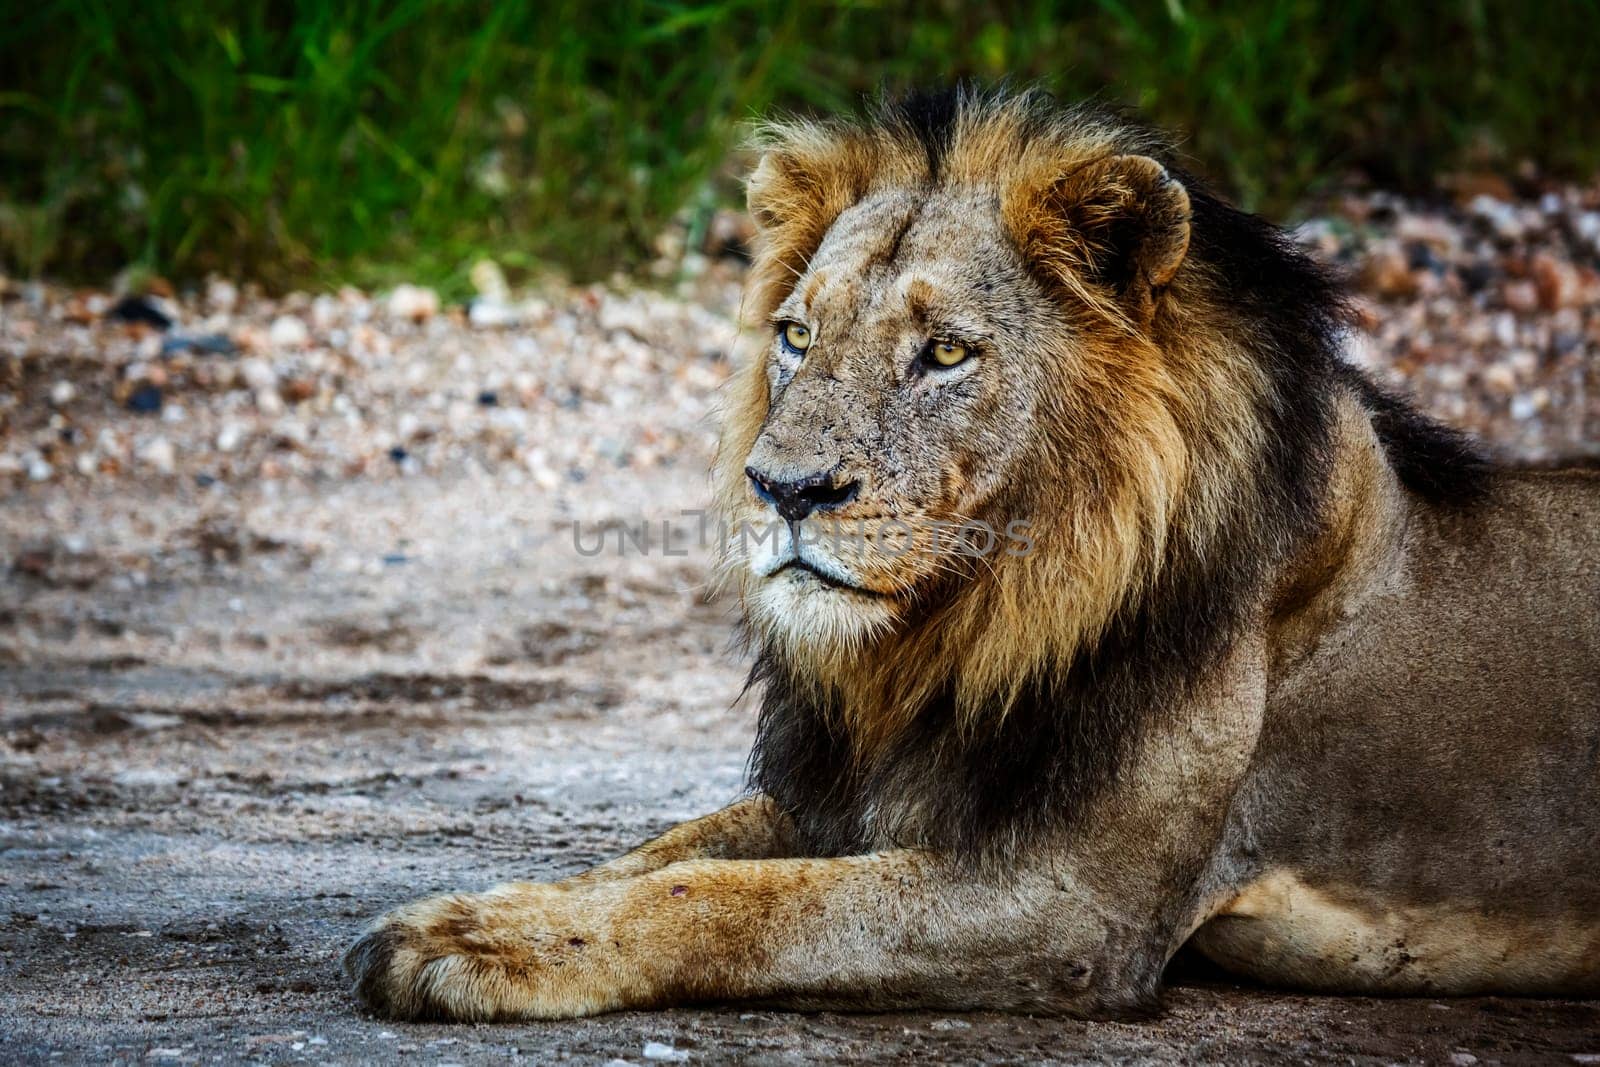 African lion male portrait lying down in Kruger National park, South Africa ; Specie Panthera leo family of Felidae